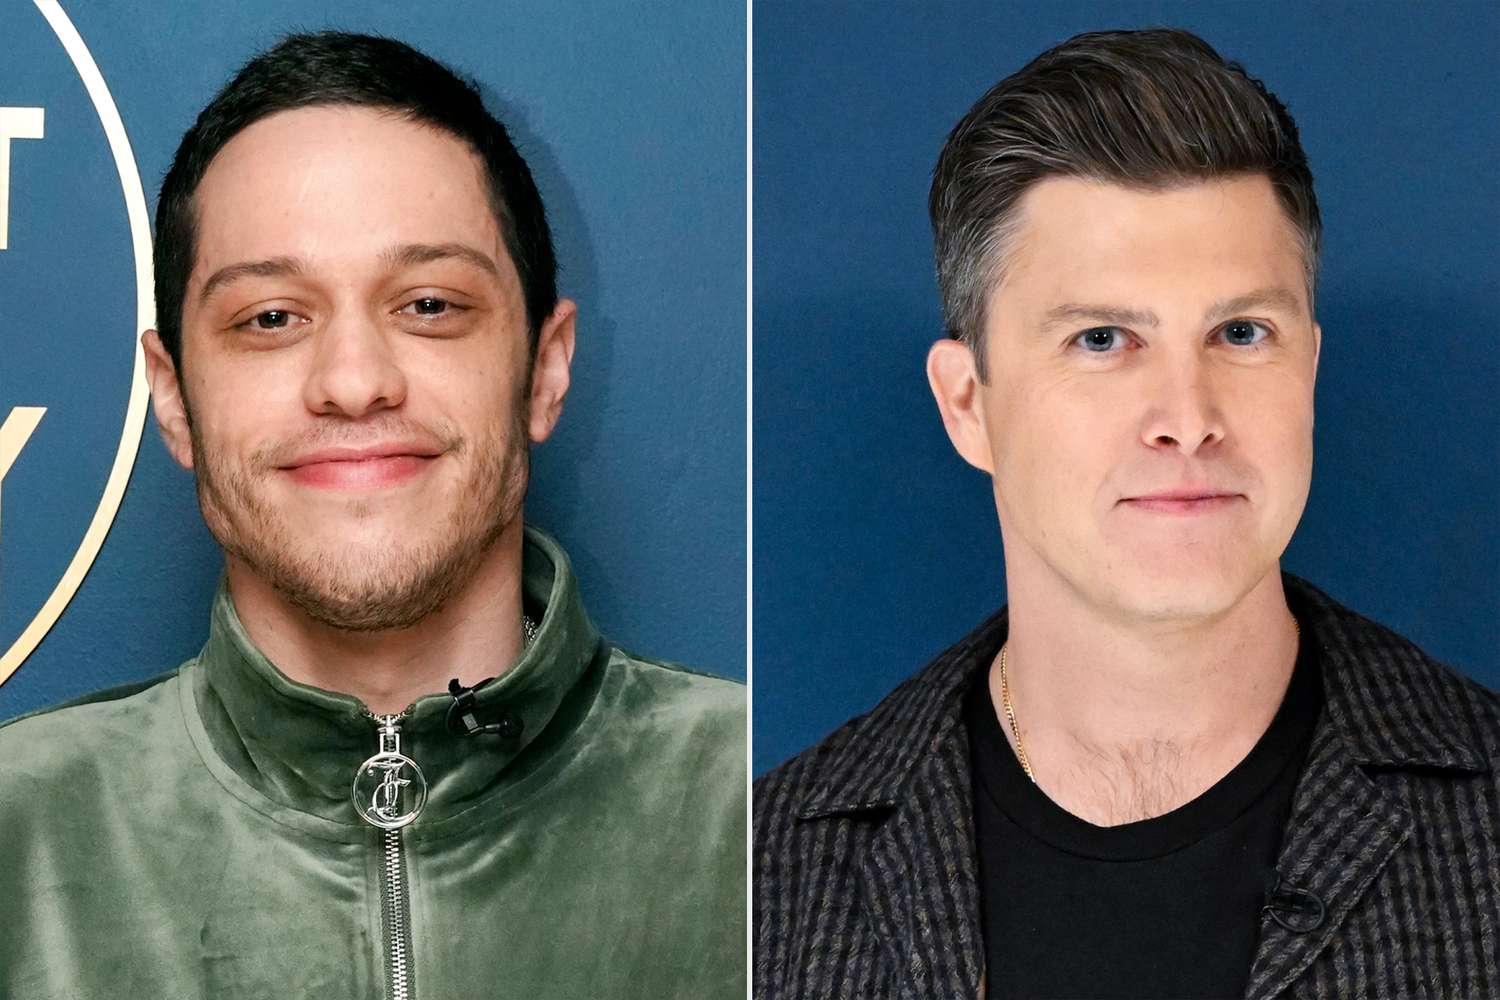 Pete Davidson may be regretting buying ferry with Colin Jost while high